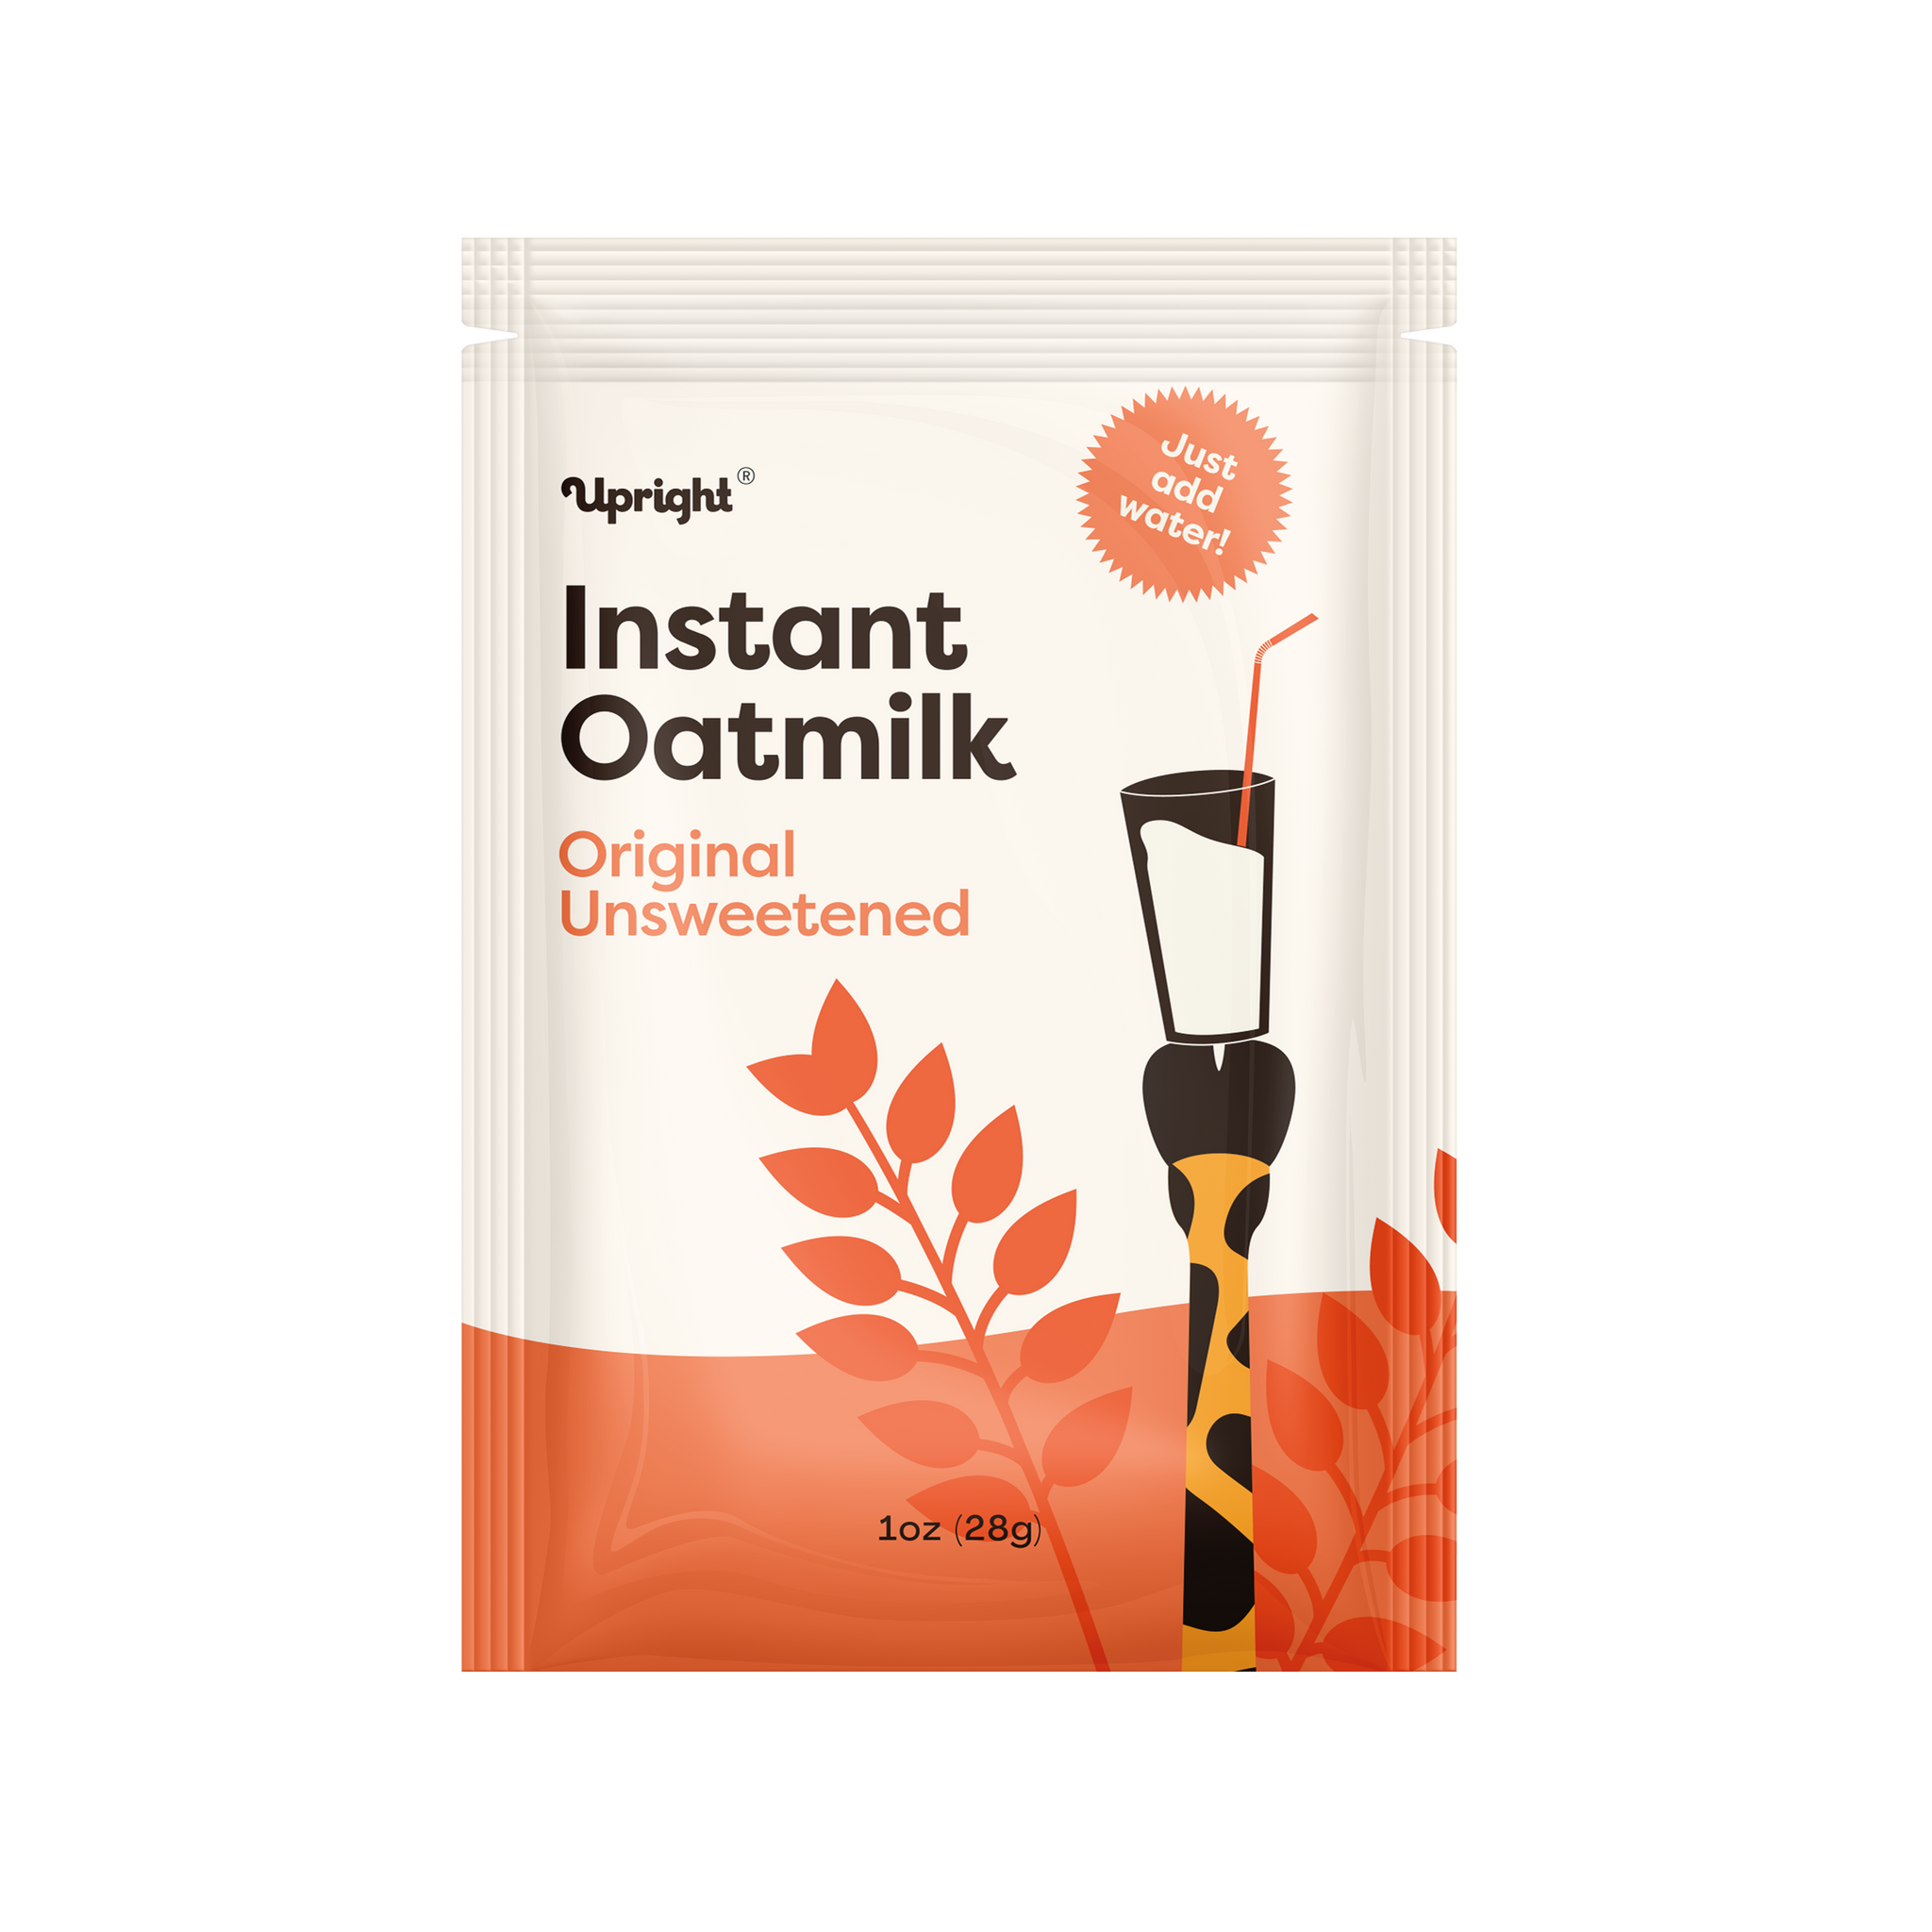 Upright: high-protein instant oatmilk - just add water!